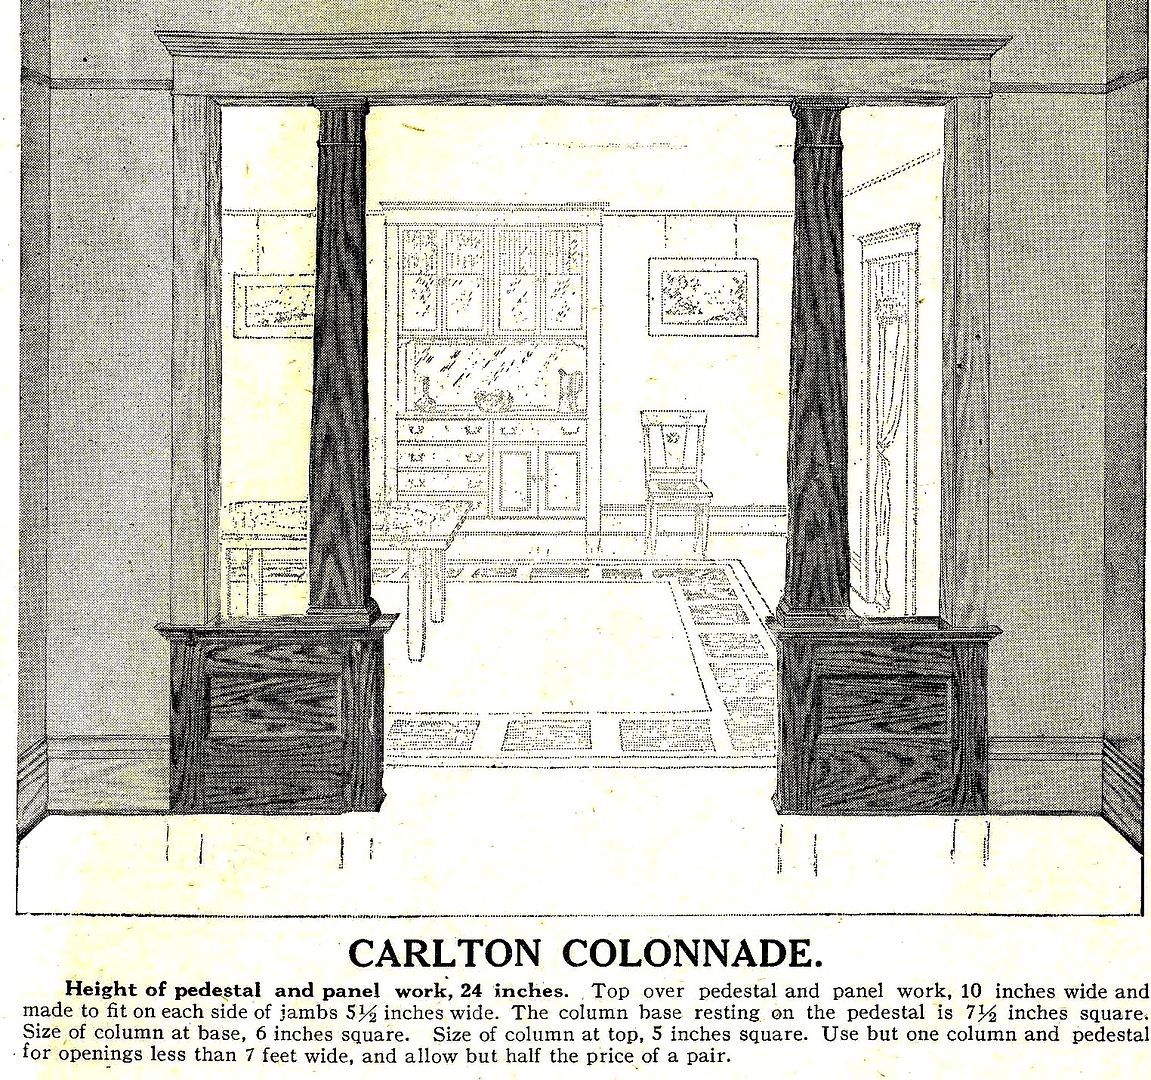 These colonnades appeared in the Sears Roebuck Building Materials catalog (1921). 